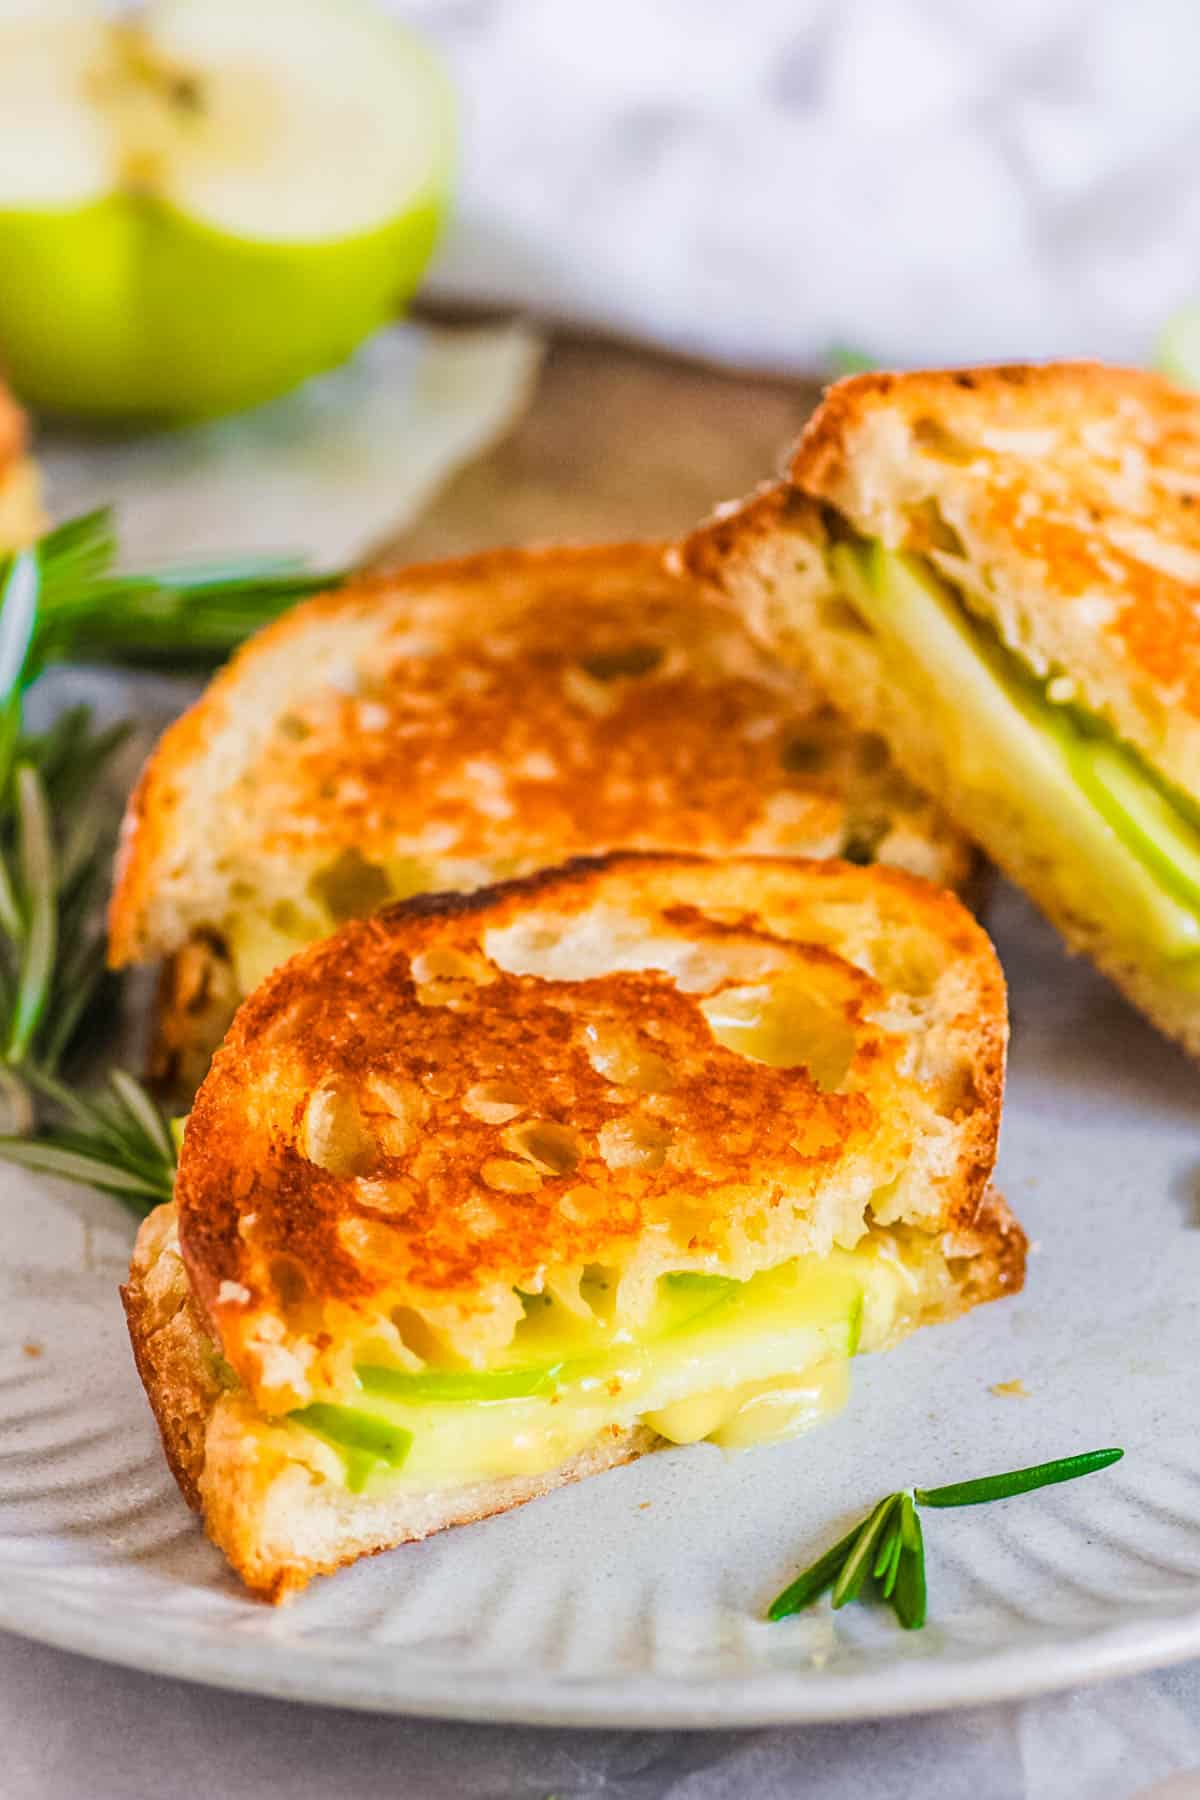 Sourdough grilled cheese sandwich with apple and brie cut and stacked on a plate with fresh herbs.